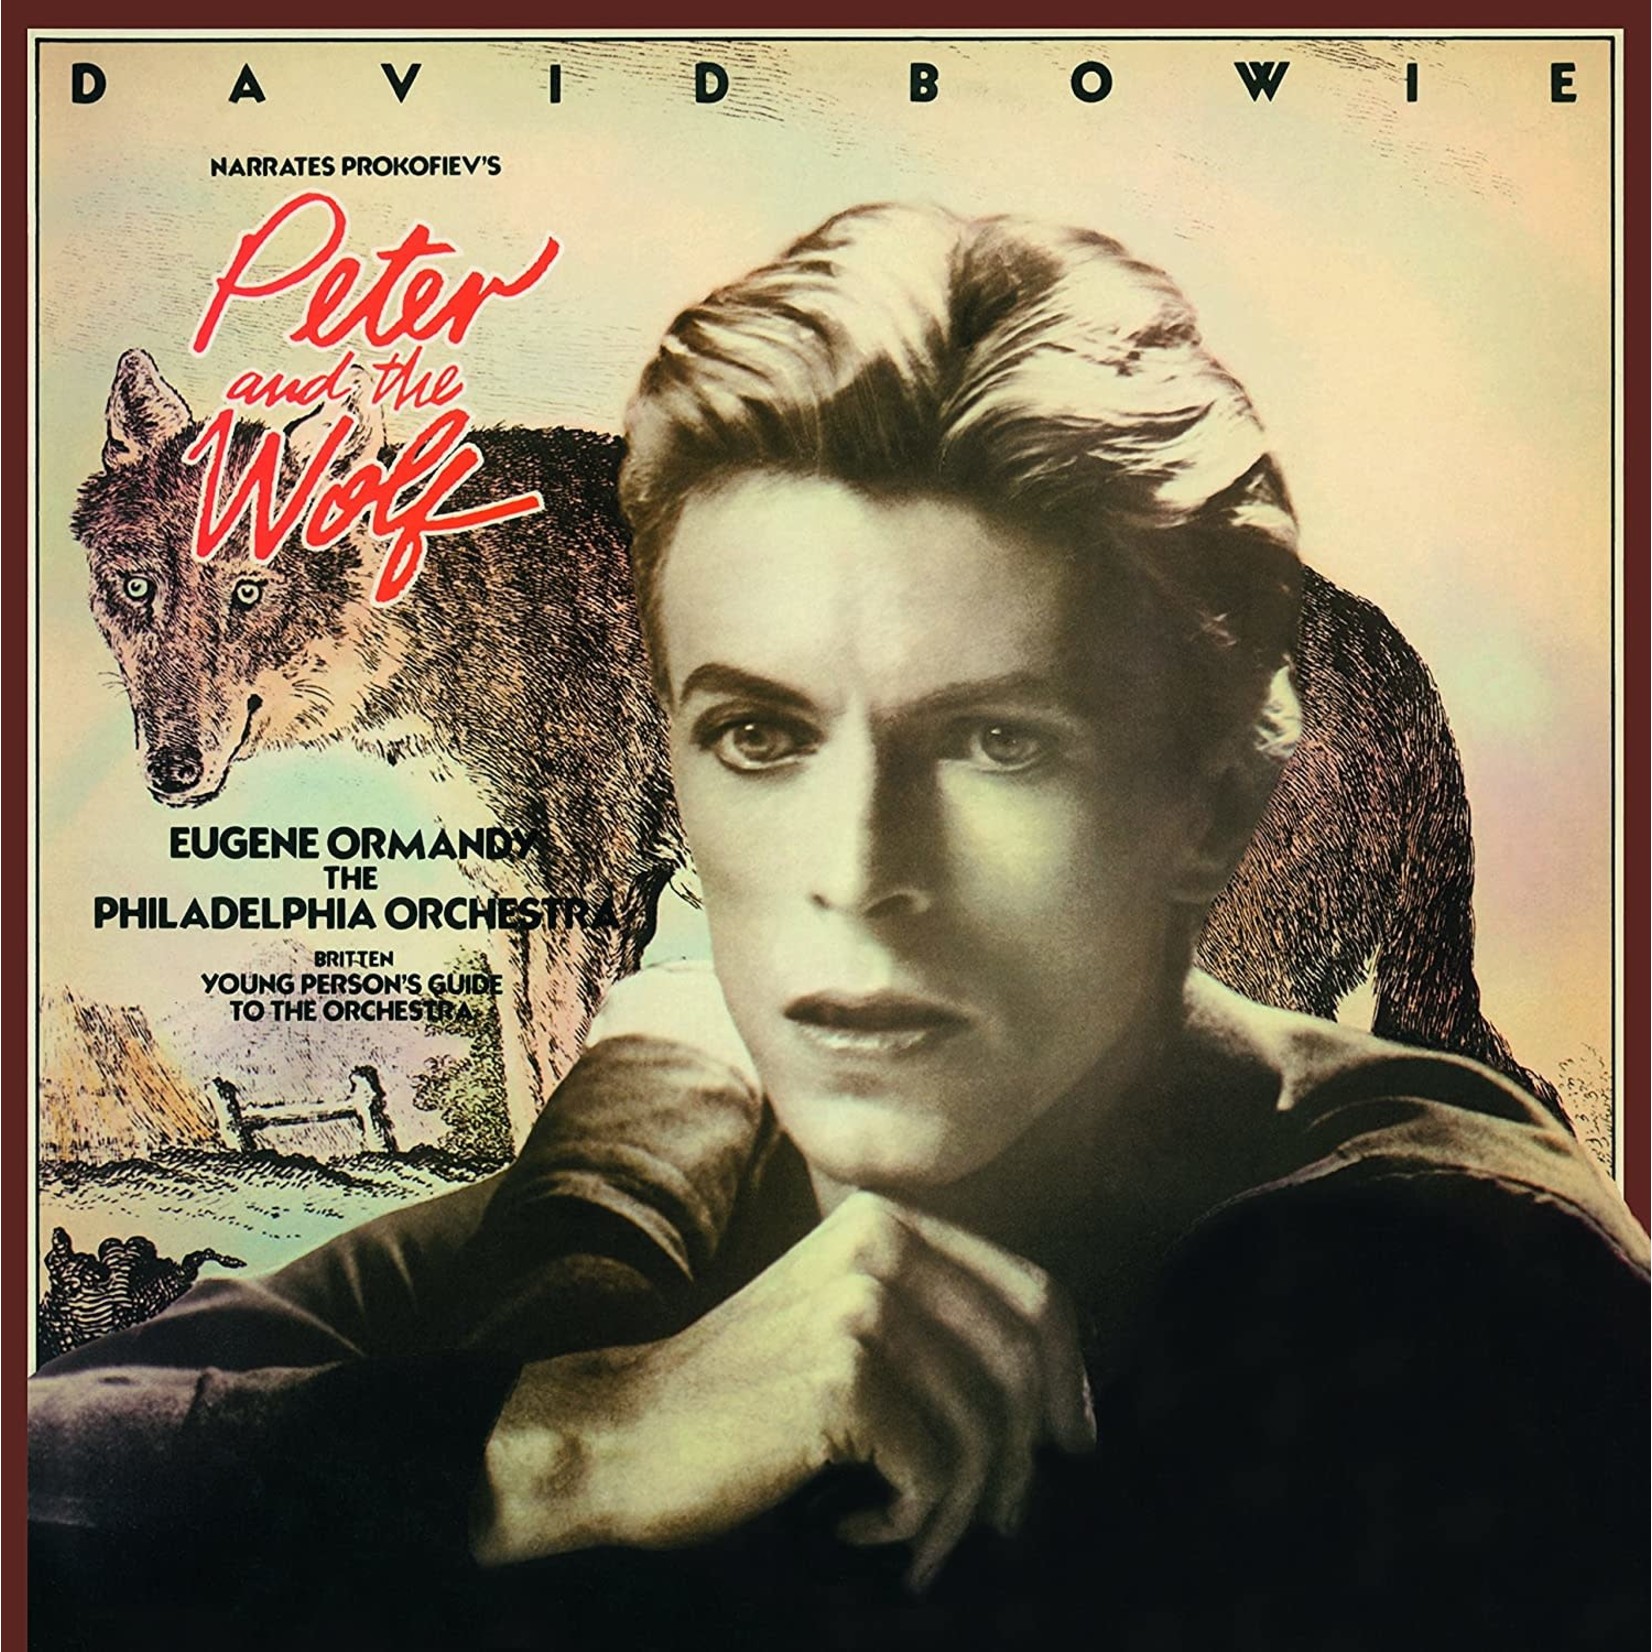 [Vintage] David Bowie - Narrates Peter & the Wolf (black or green vinyl)